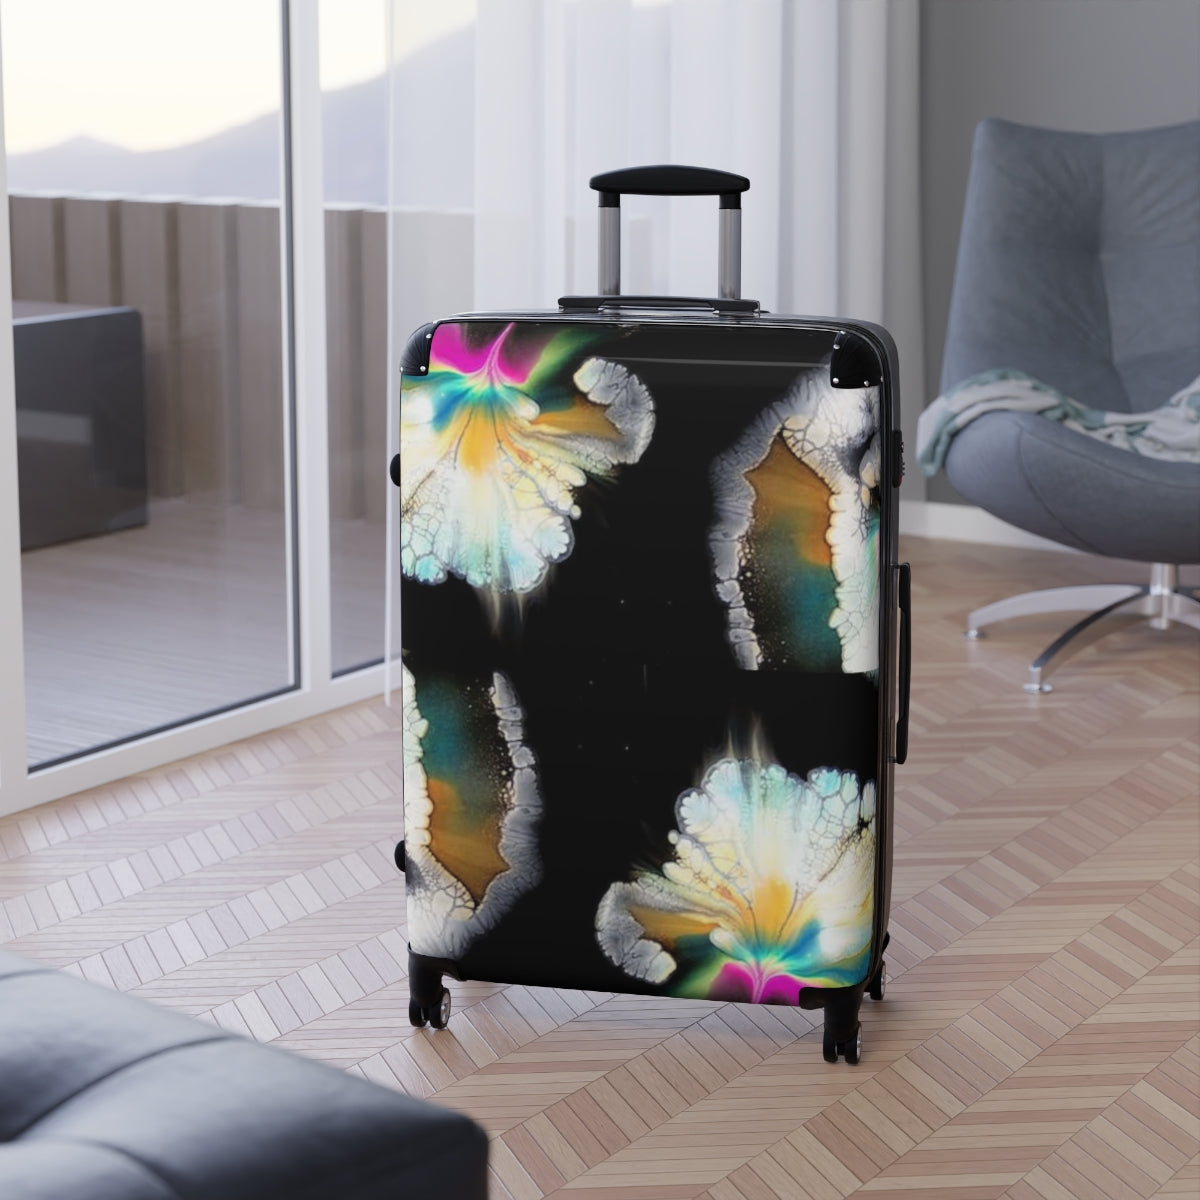 BEST CARRY-ON LUGGAGE SET, ABSTRACT ART CABIN SUITCASES BY ARTZIRA, FLORAL CABIN SUITCASE FOR GIRLS, WOMEN, GIFT FOR BRIDESMAIDS, GIFT FOR MOTHERS, DOUBLE WHEELED SPINNER